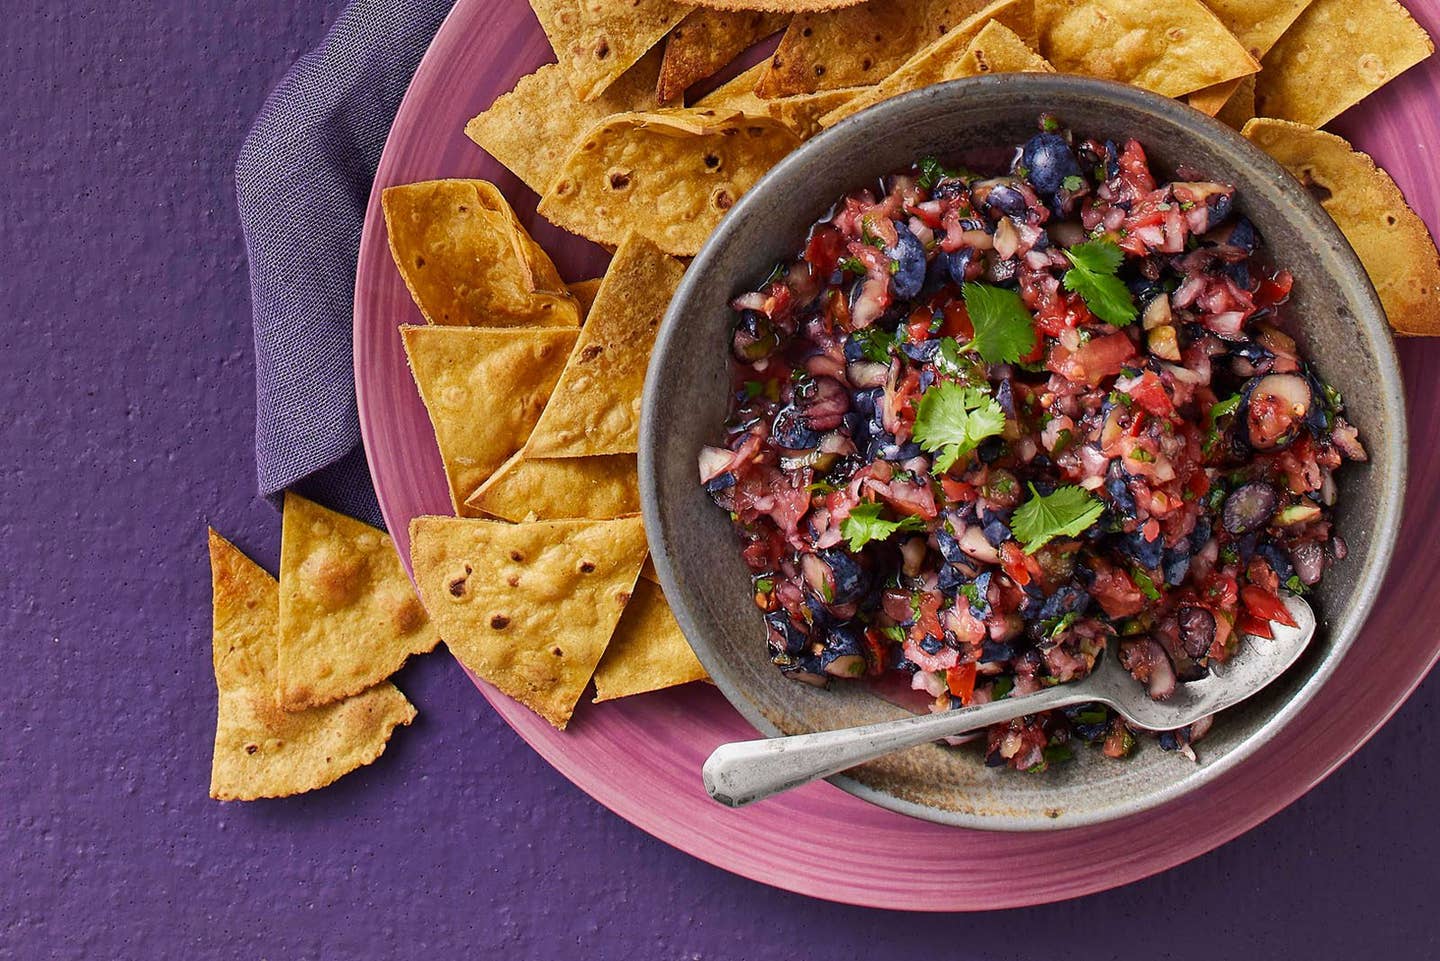 Blueberry salsa with tortilla chips on the side on a purple table